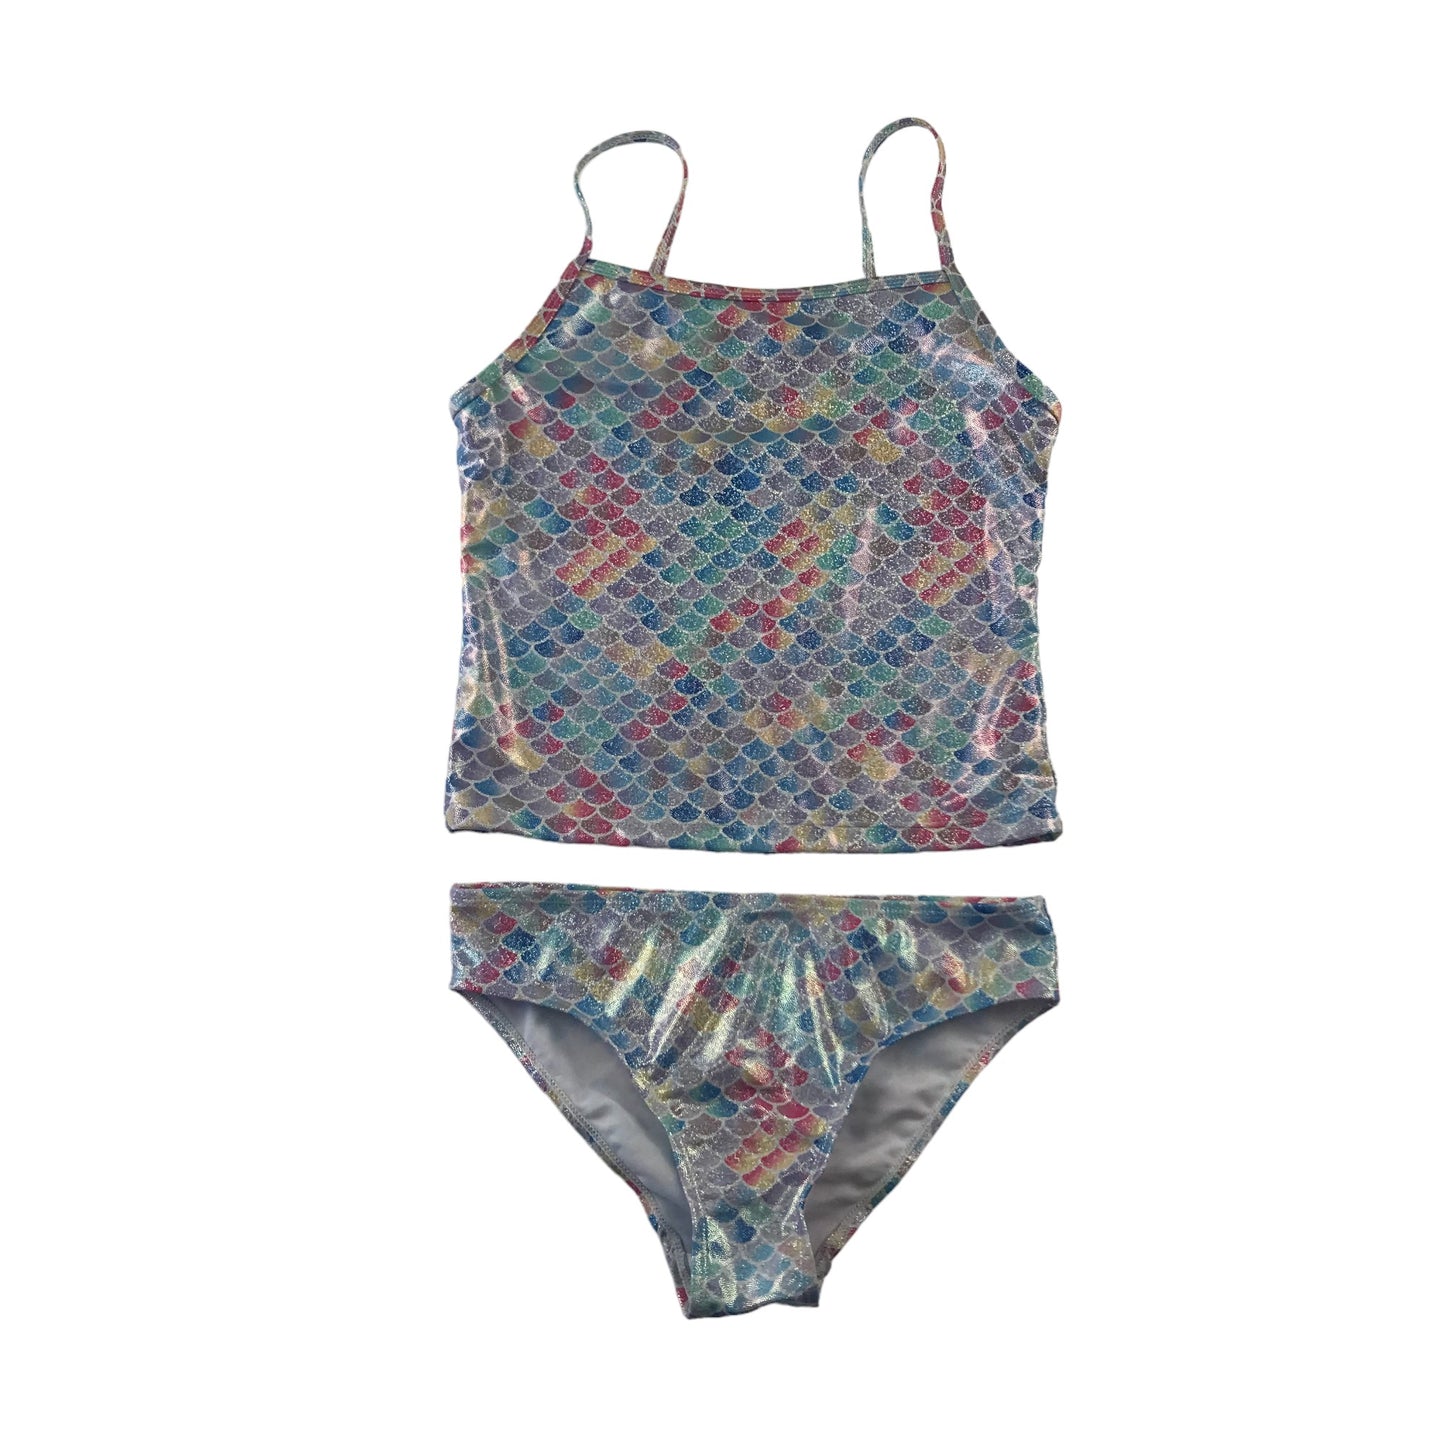 Primark swimsuit 11-12 years pastel colour sparkly mermaid scale 2 piece set